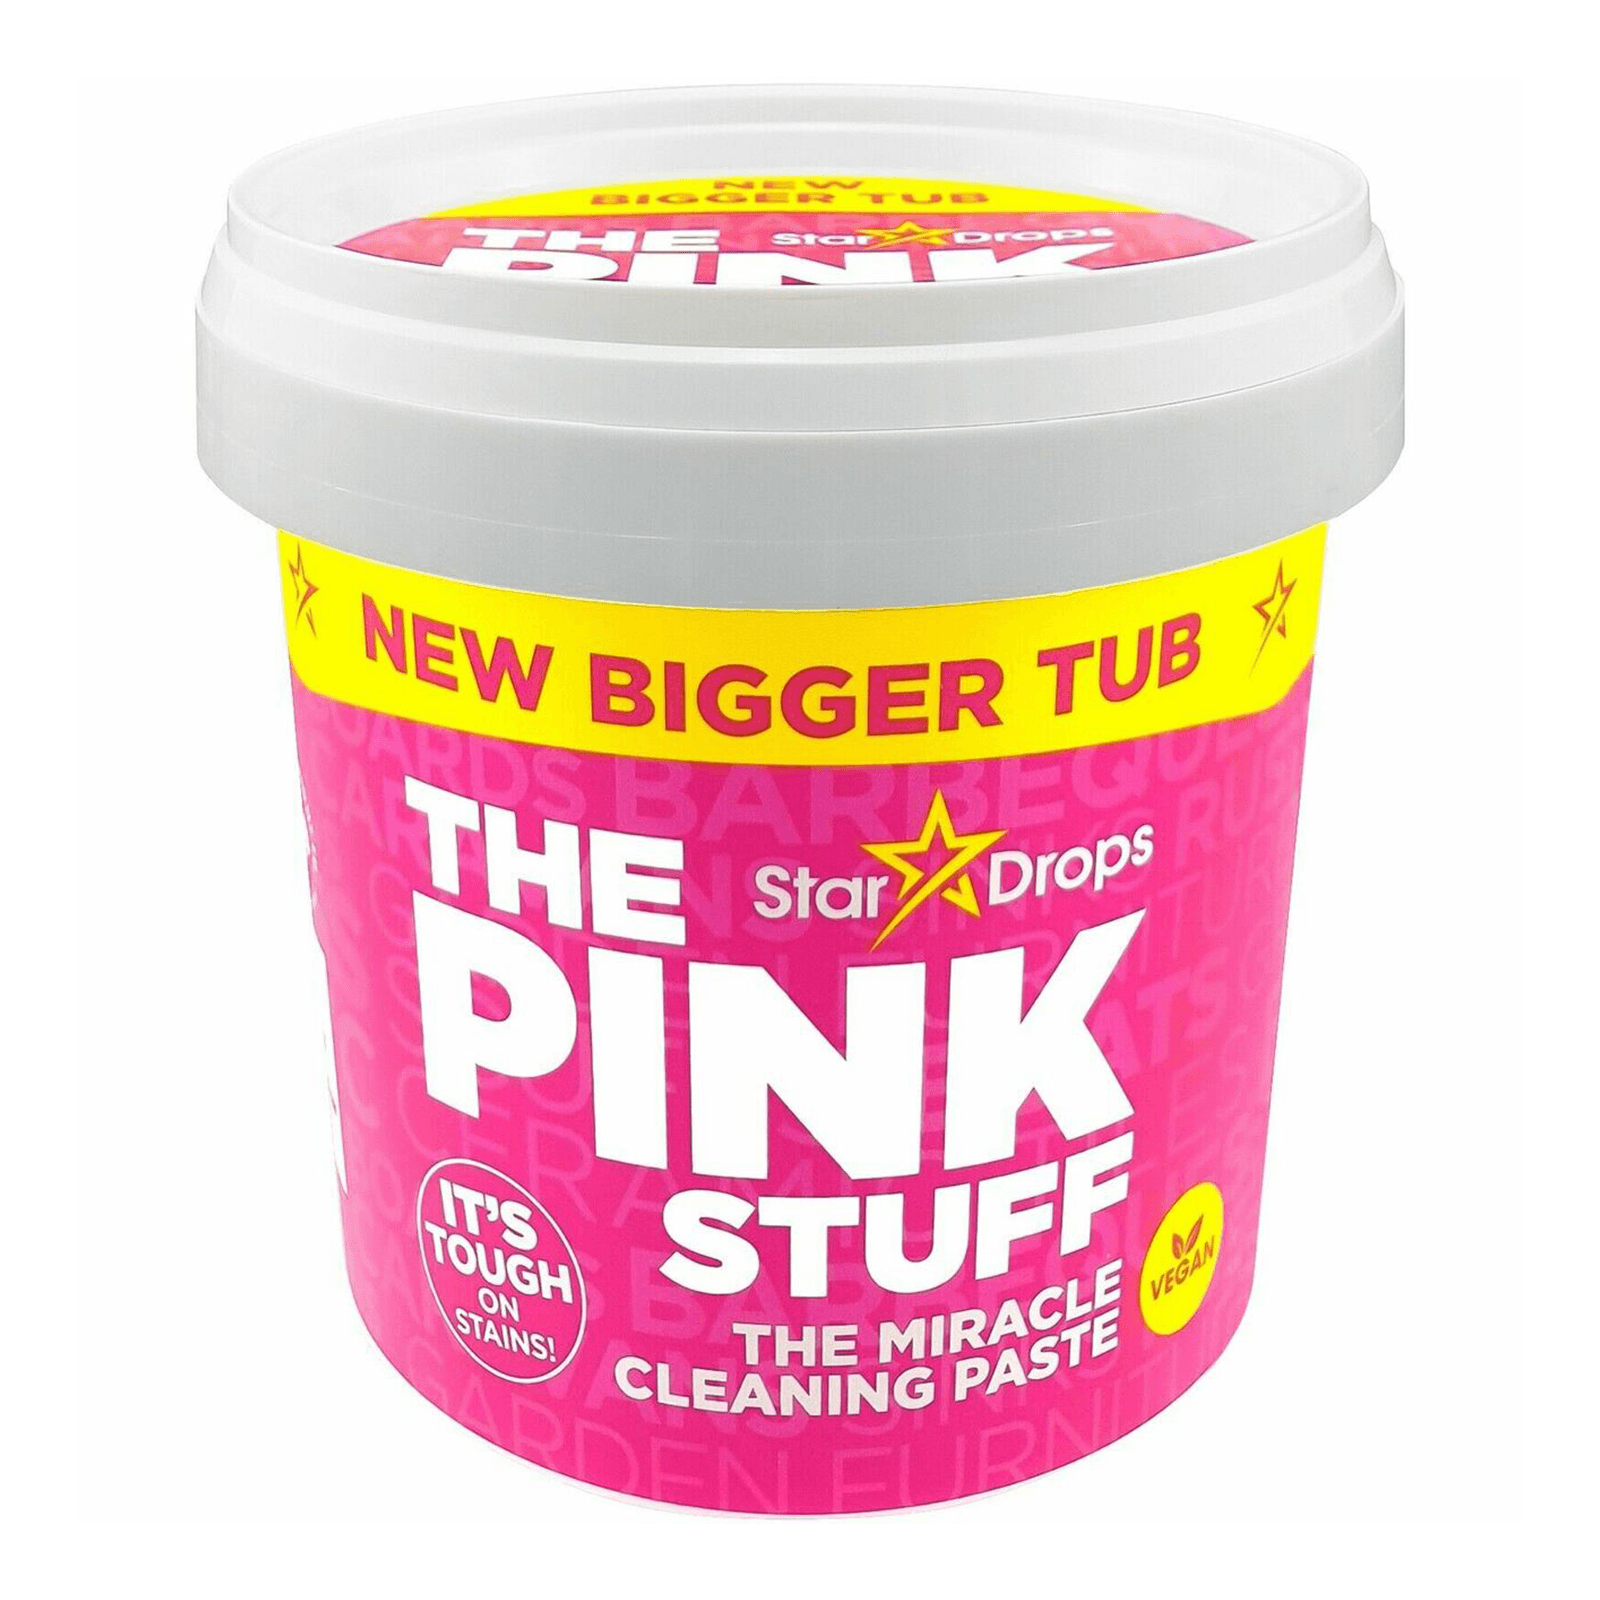 Stardrops The Pink Stuff Miracle Cleaning Paste - 850g Tub - Vending Superstore